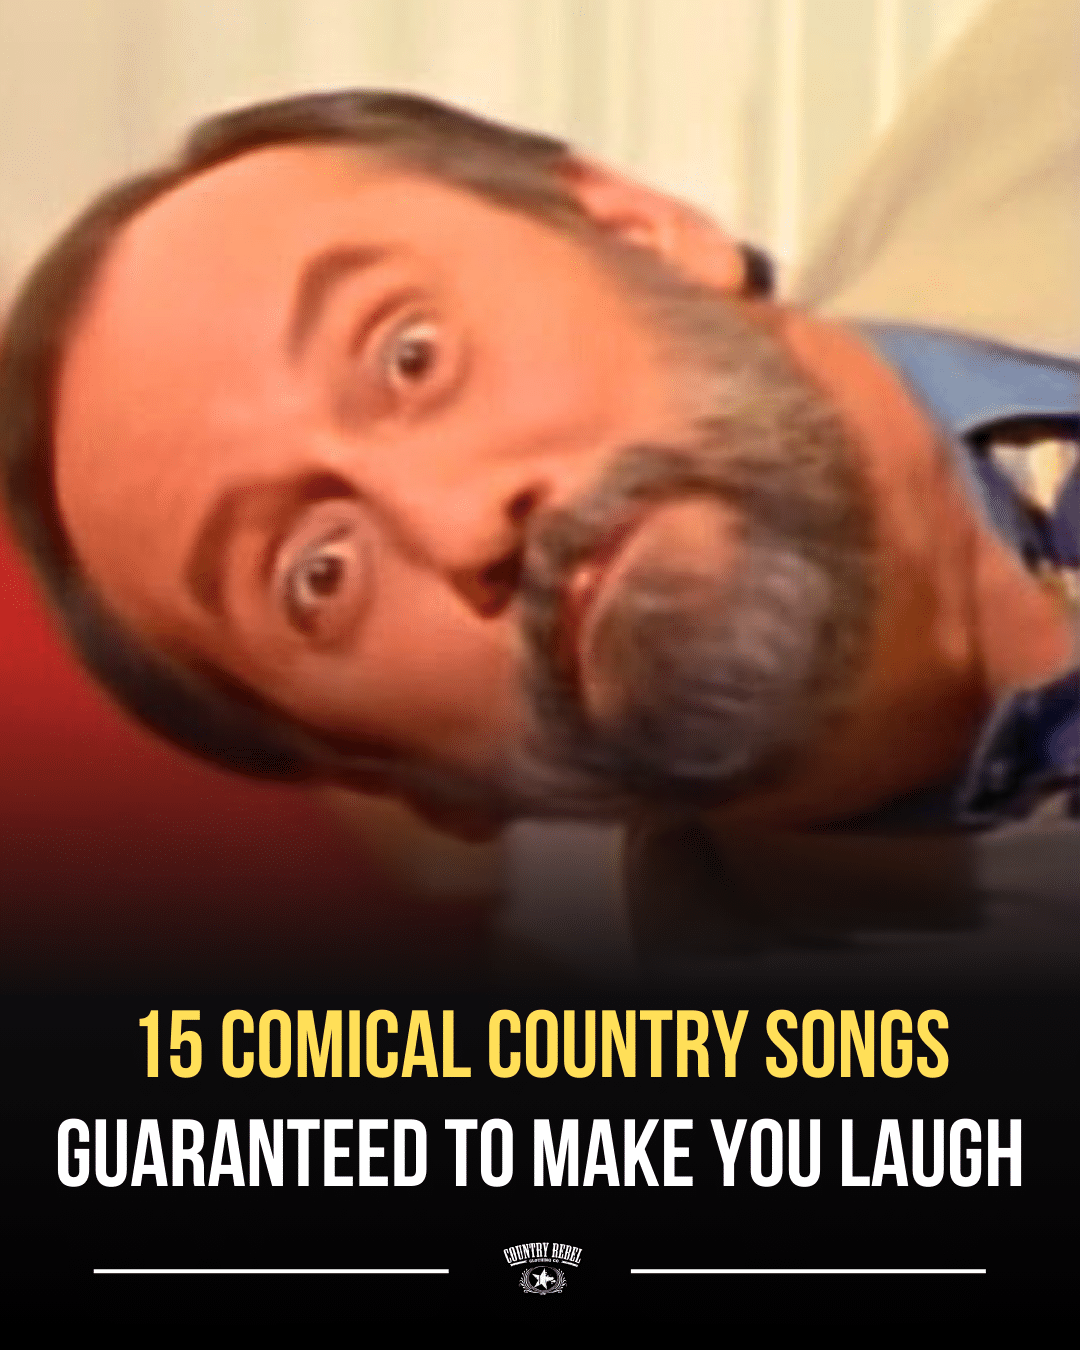 15 comical country songs, including an image of Ray Stevens in his music video for "Mississippi Squirrel Revival"